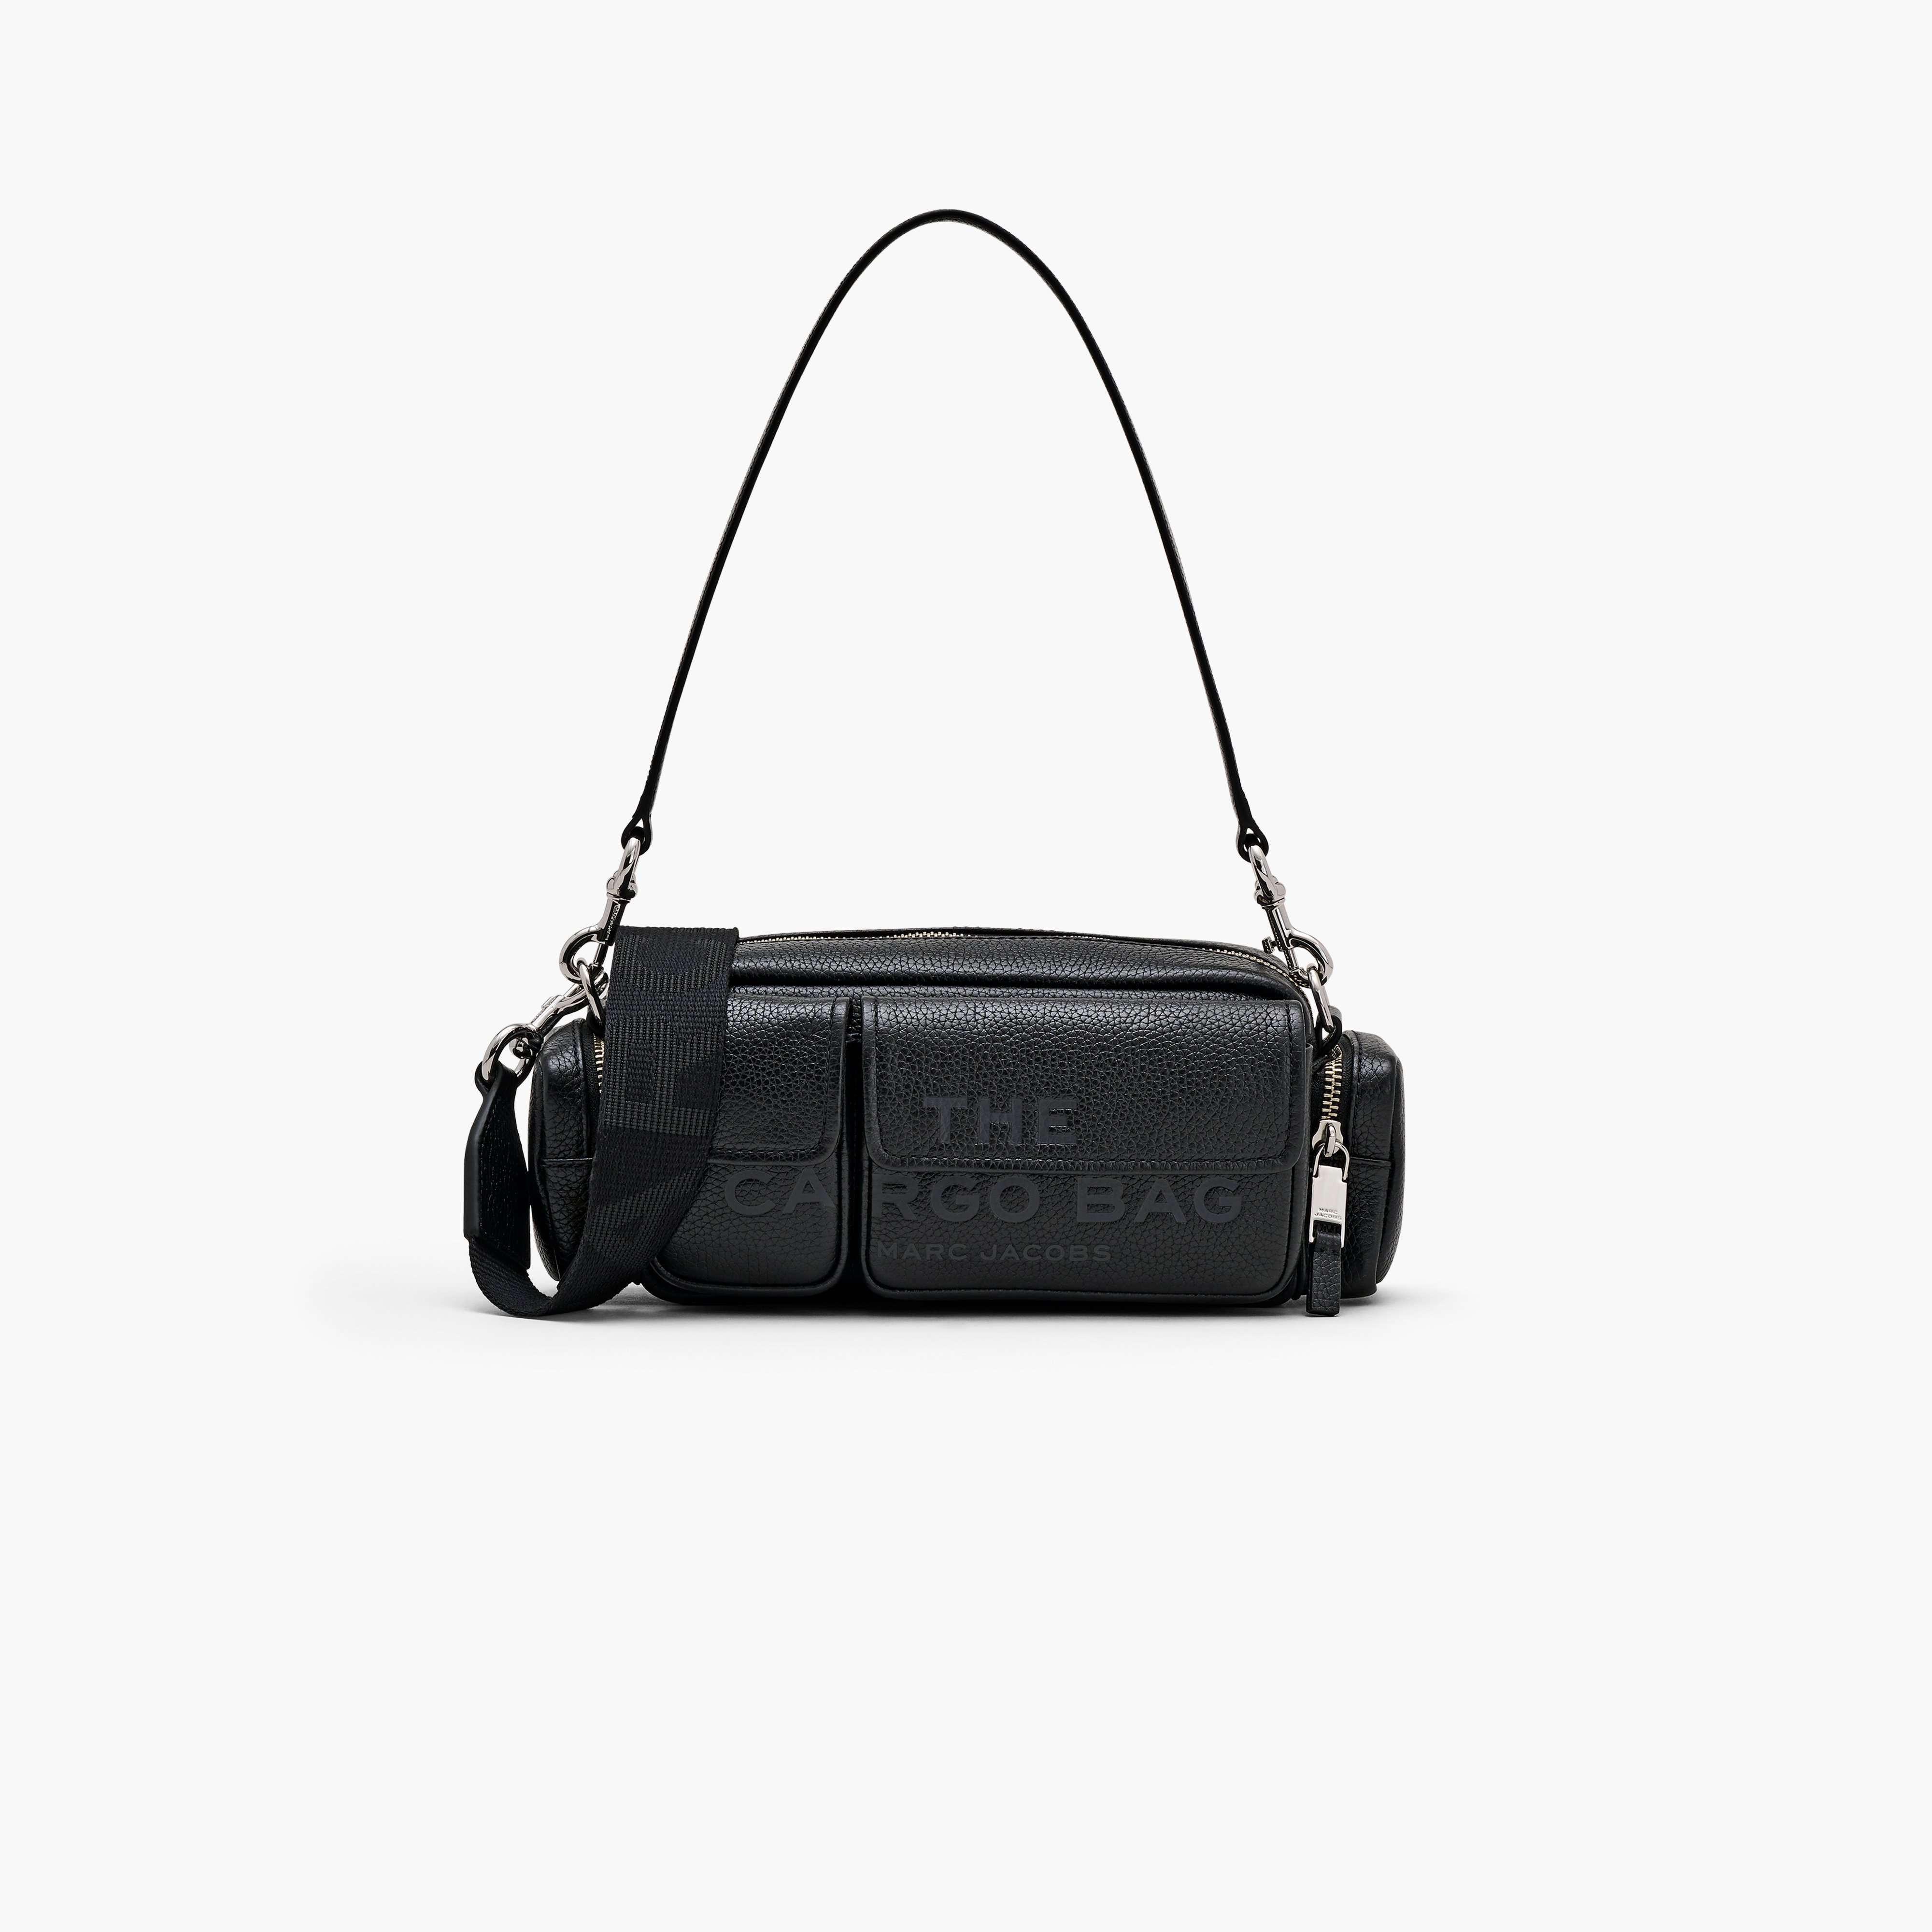 The Leather Cargo Bag in Black